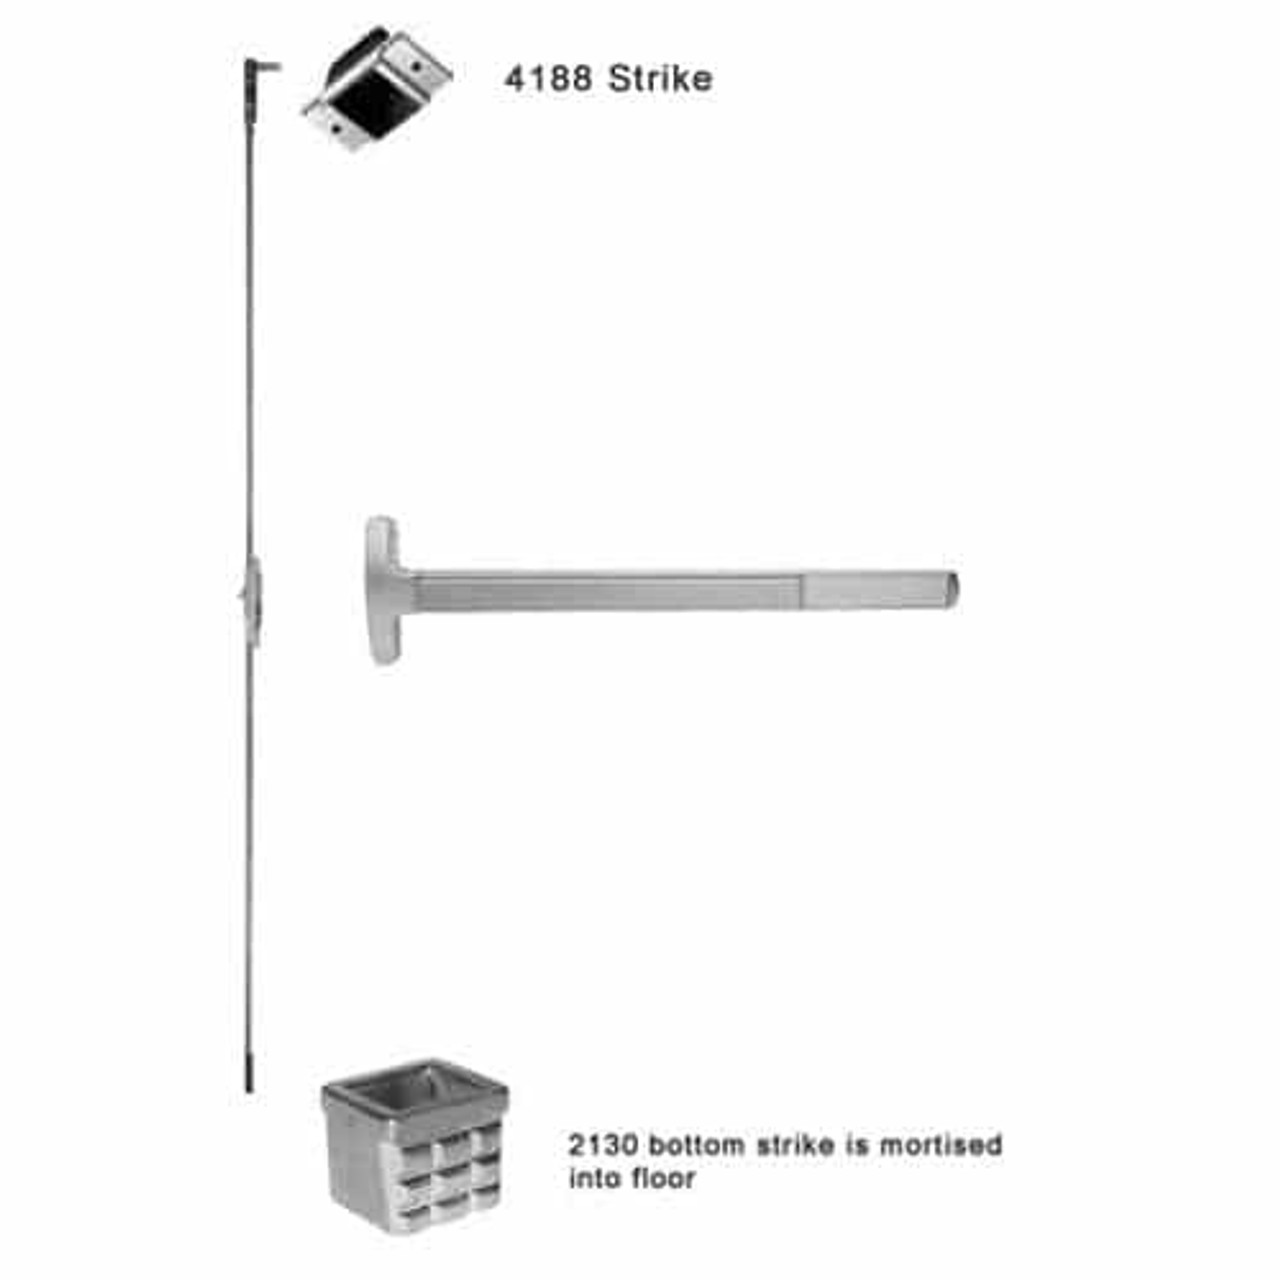 F-24-C-L-DT-DANE-US32-2-RHR Falcon 24 Series Fire Rated Concealed Vertical Rod Device 712L-DT Dane Lever with Dummy Trim in Polished Stainless Steel